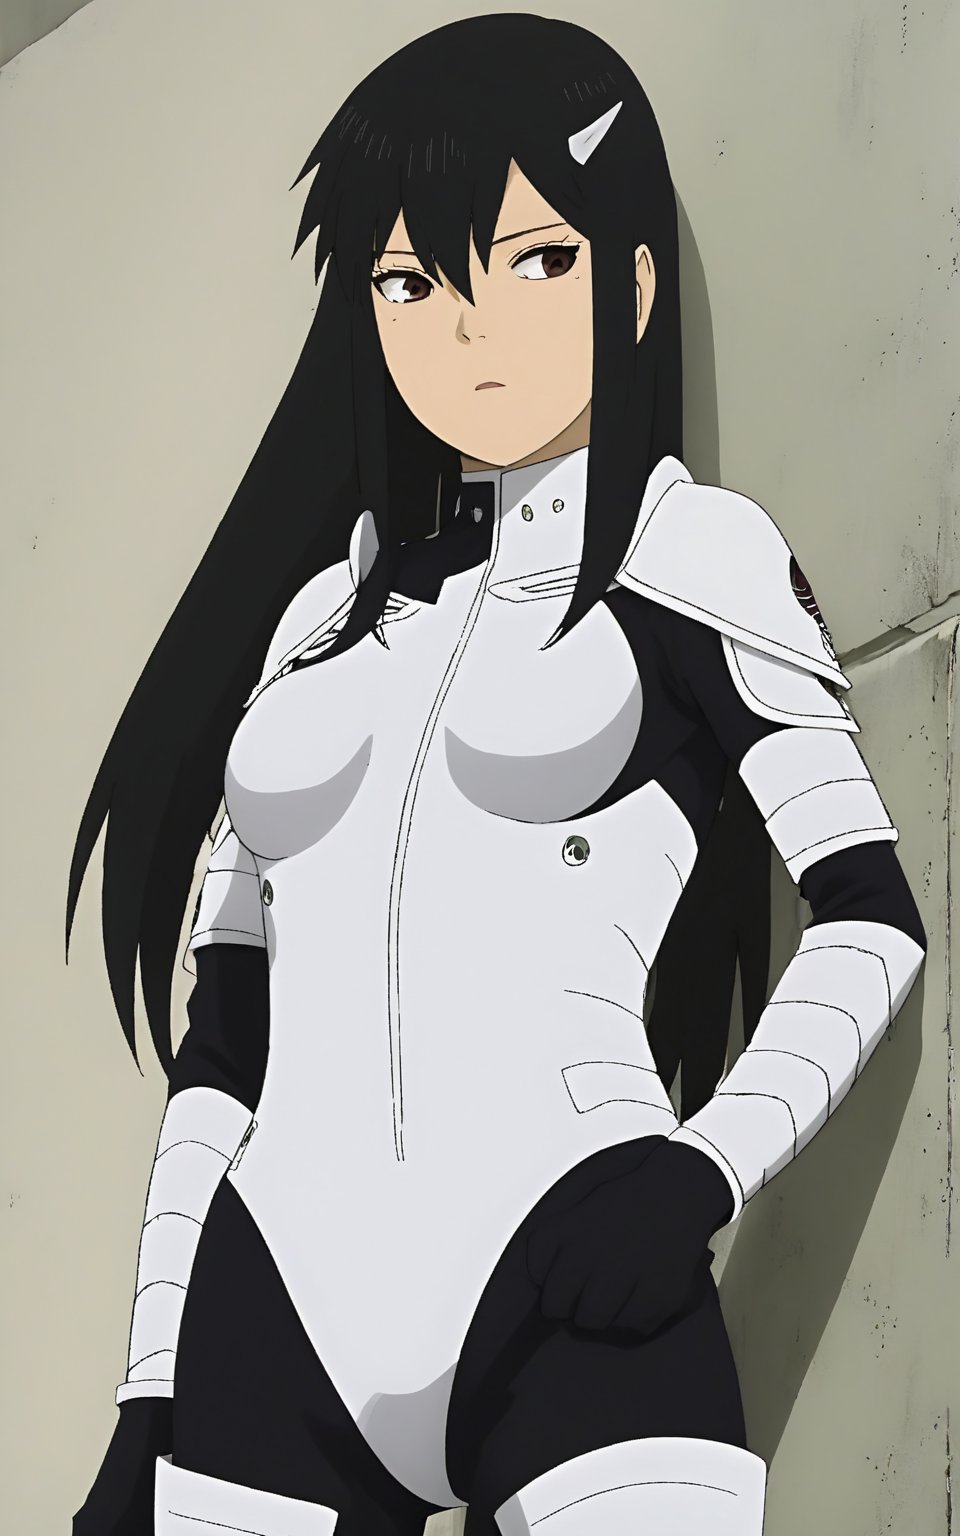 Kaiju No. 8, Mina Ashiro with long black hair and a white uniform is looking off to the side while standing in front of a wall, armor bodysuit